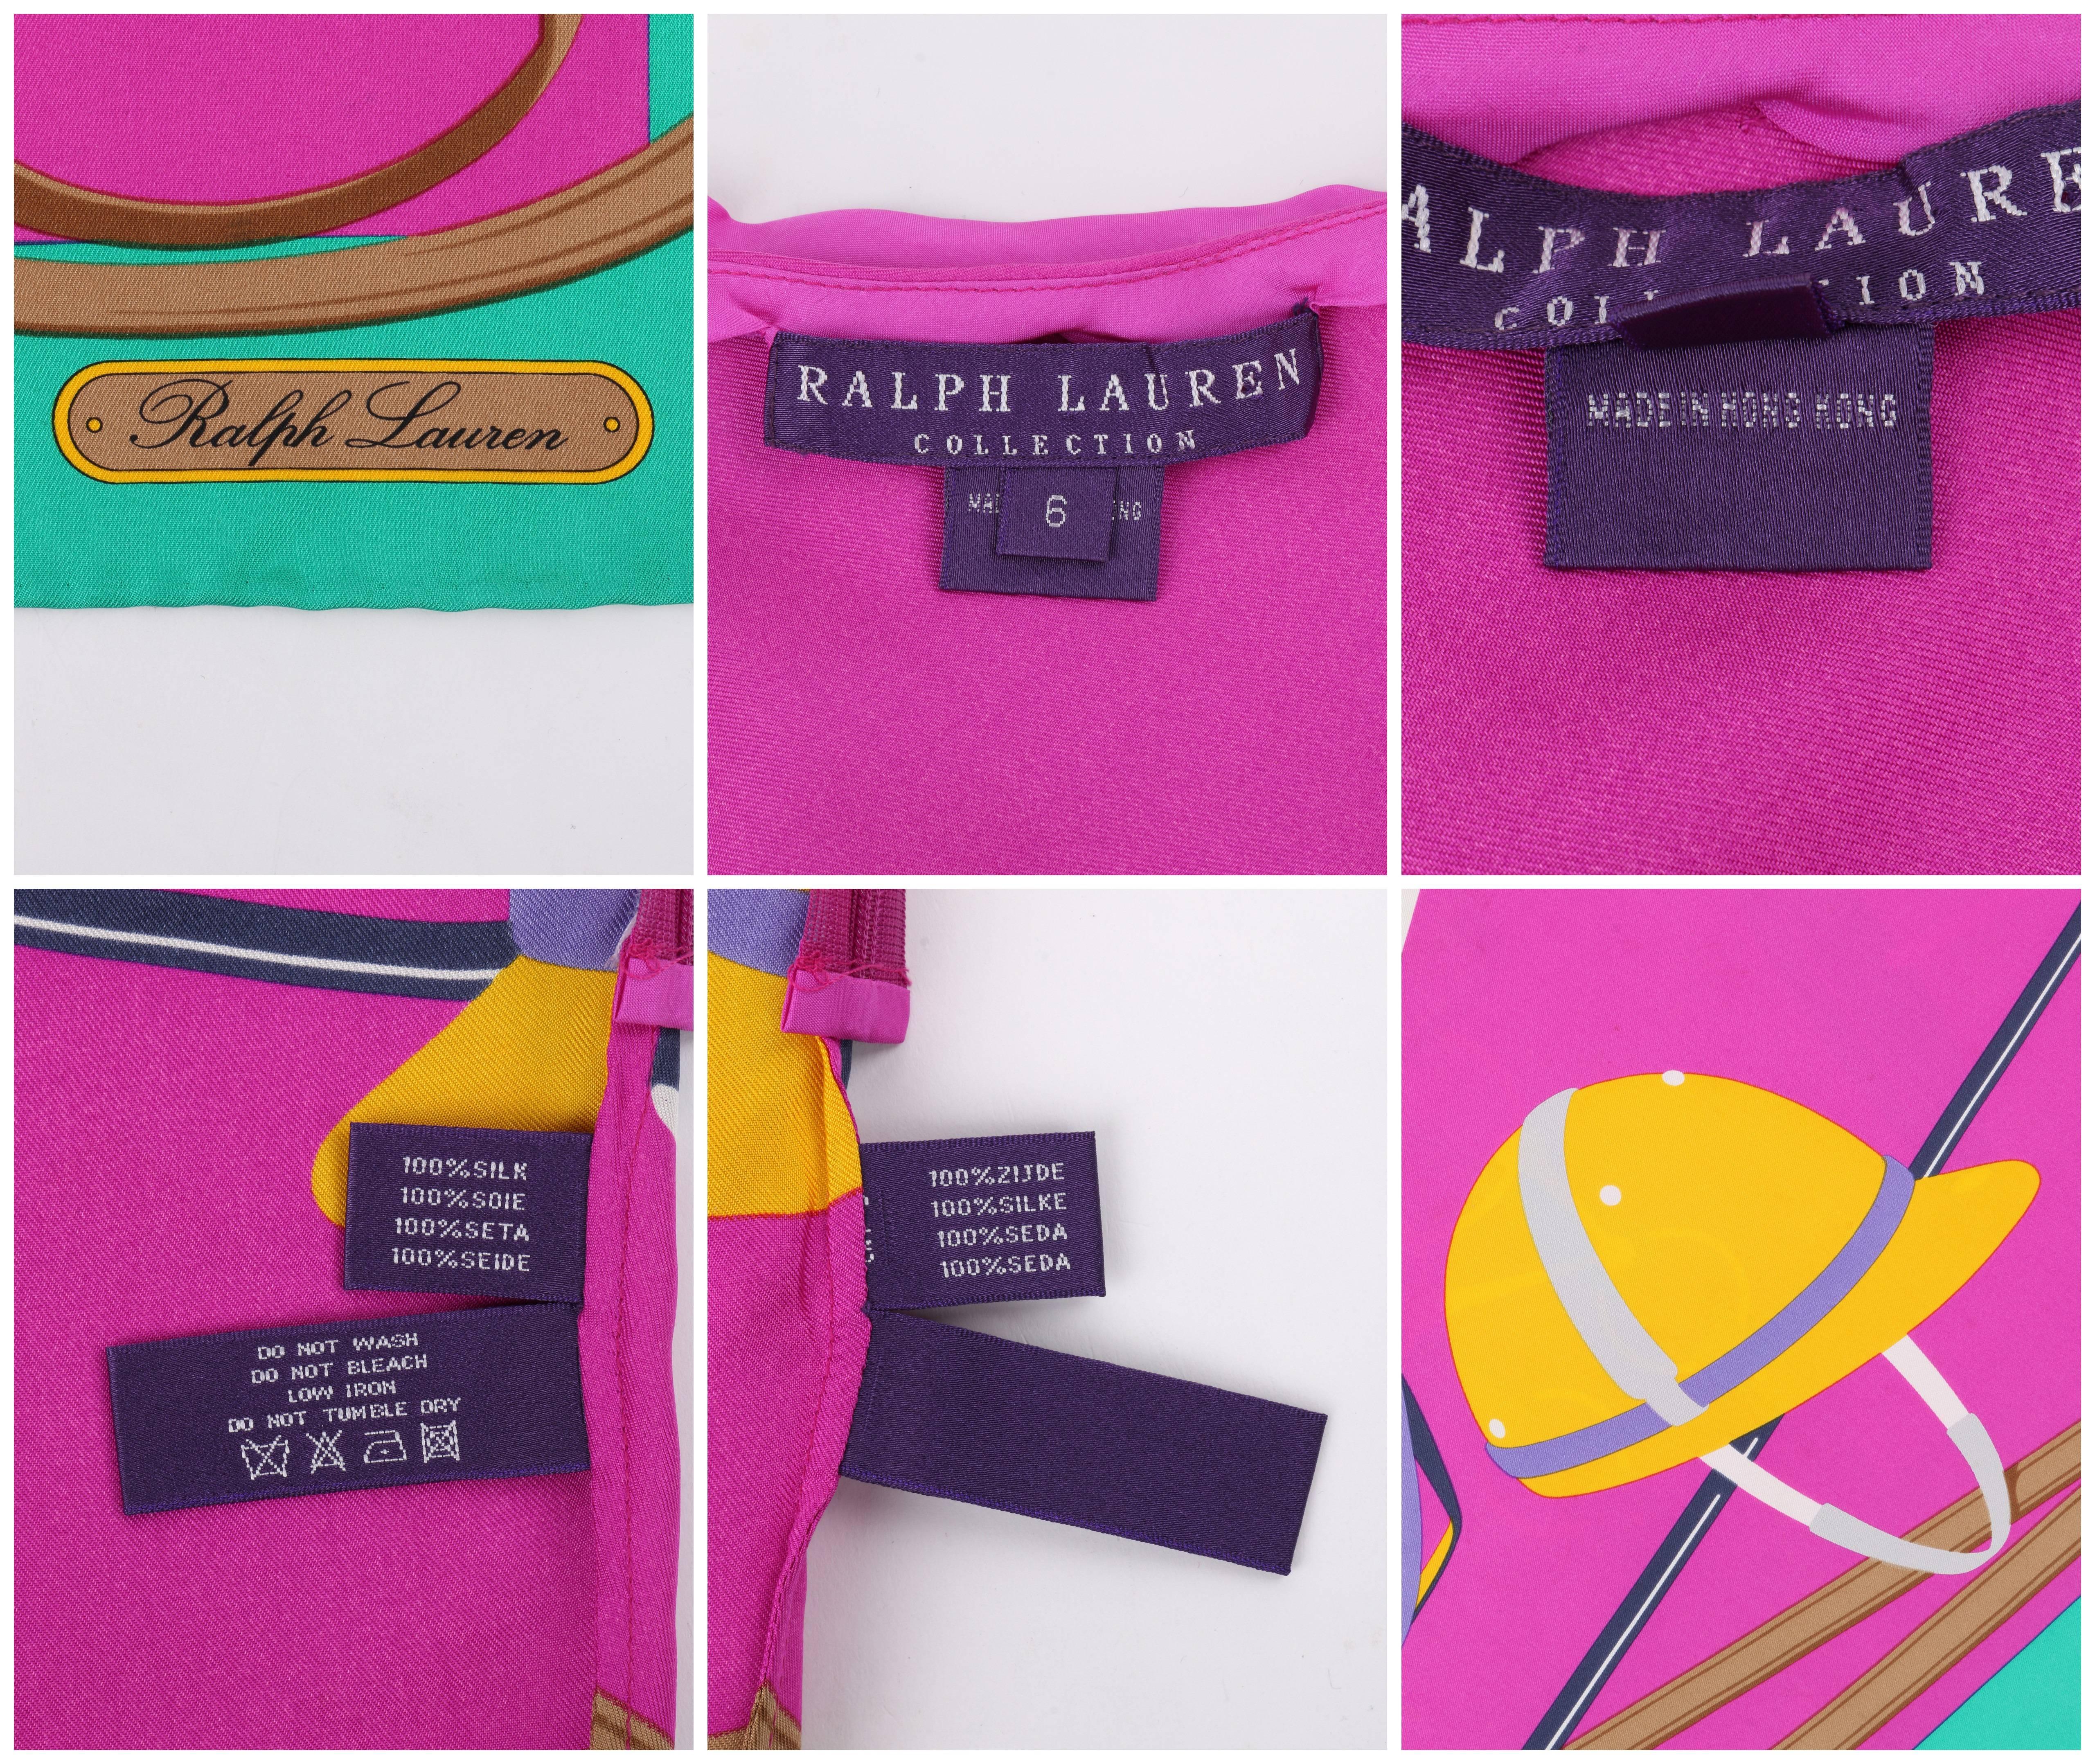 RALPH LAUREN COLLECTION Silk Equestrian Polo Theme One Shoulder Scarf Blouse Top 1